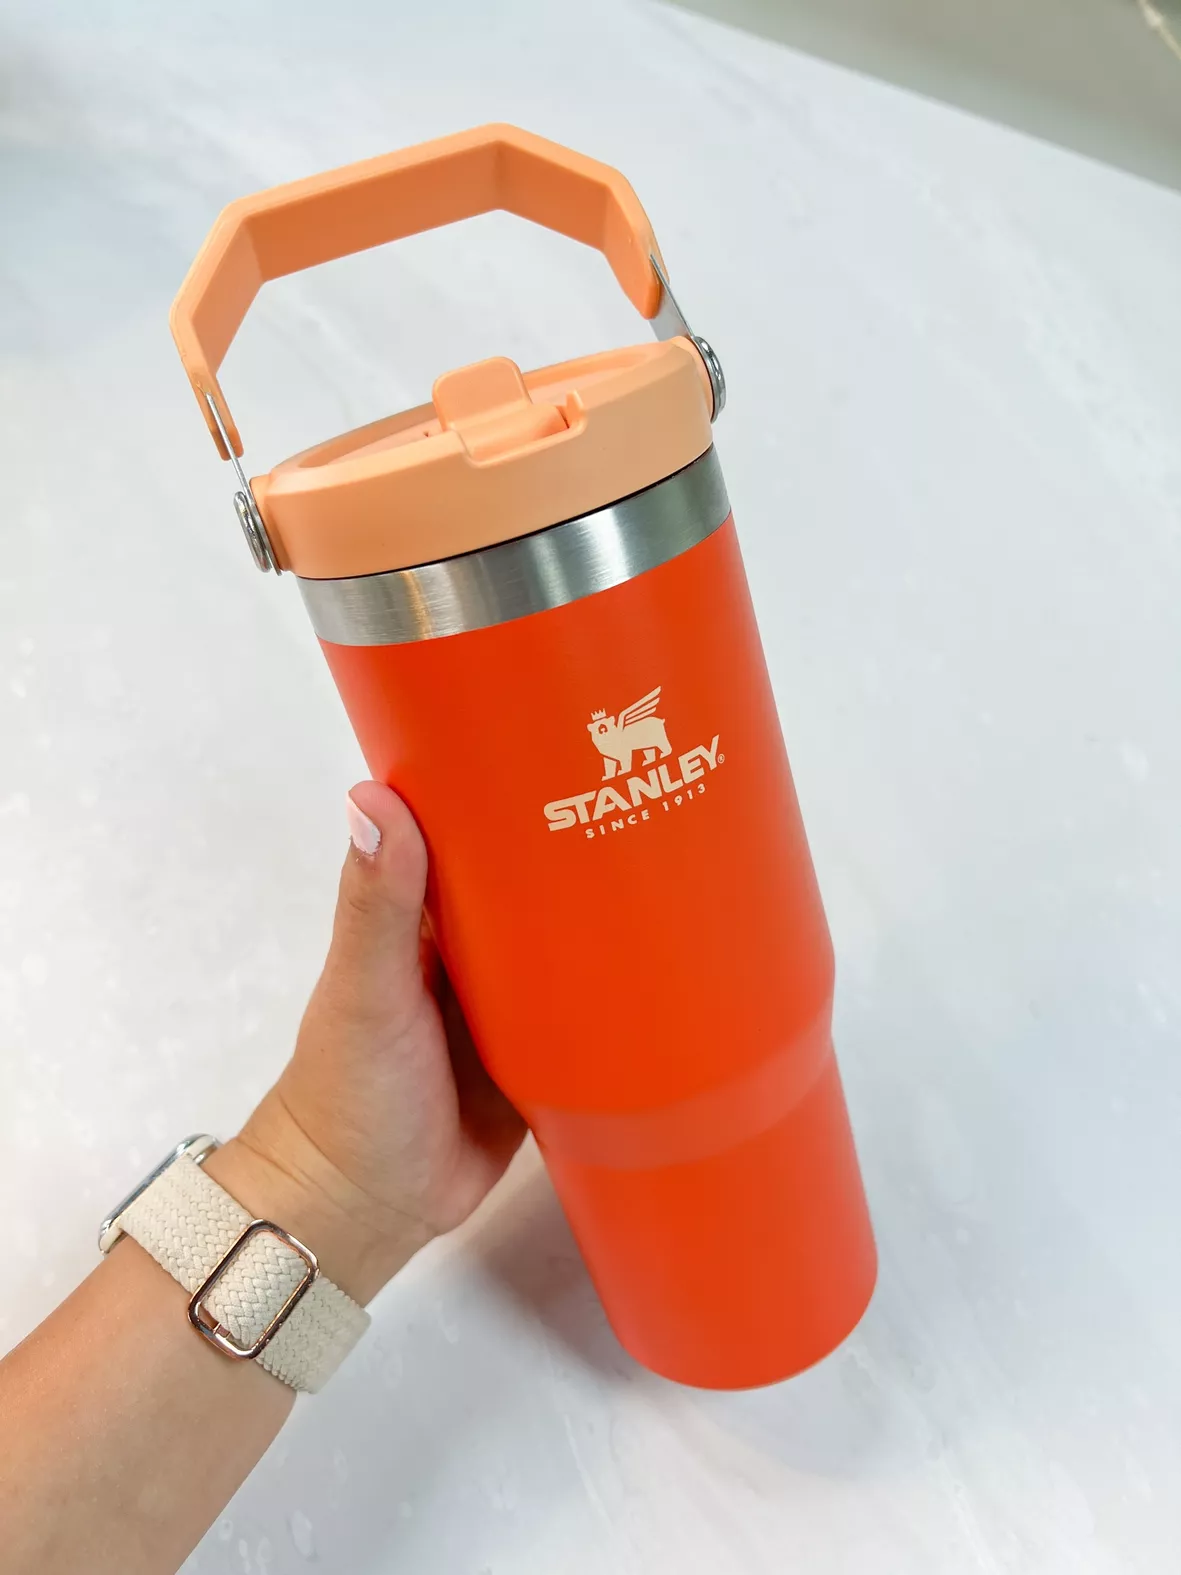 The IceFlow Flip Straw Tumbler curated on LTK in 2023  Tumbler with straw,  Christmas wishlist, Christmas list